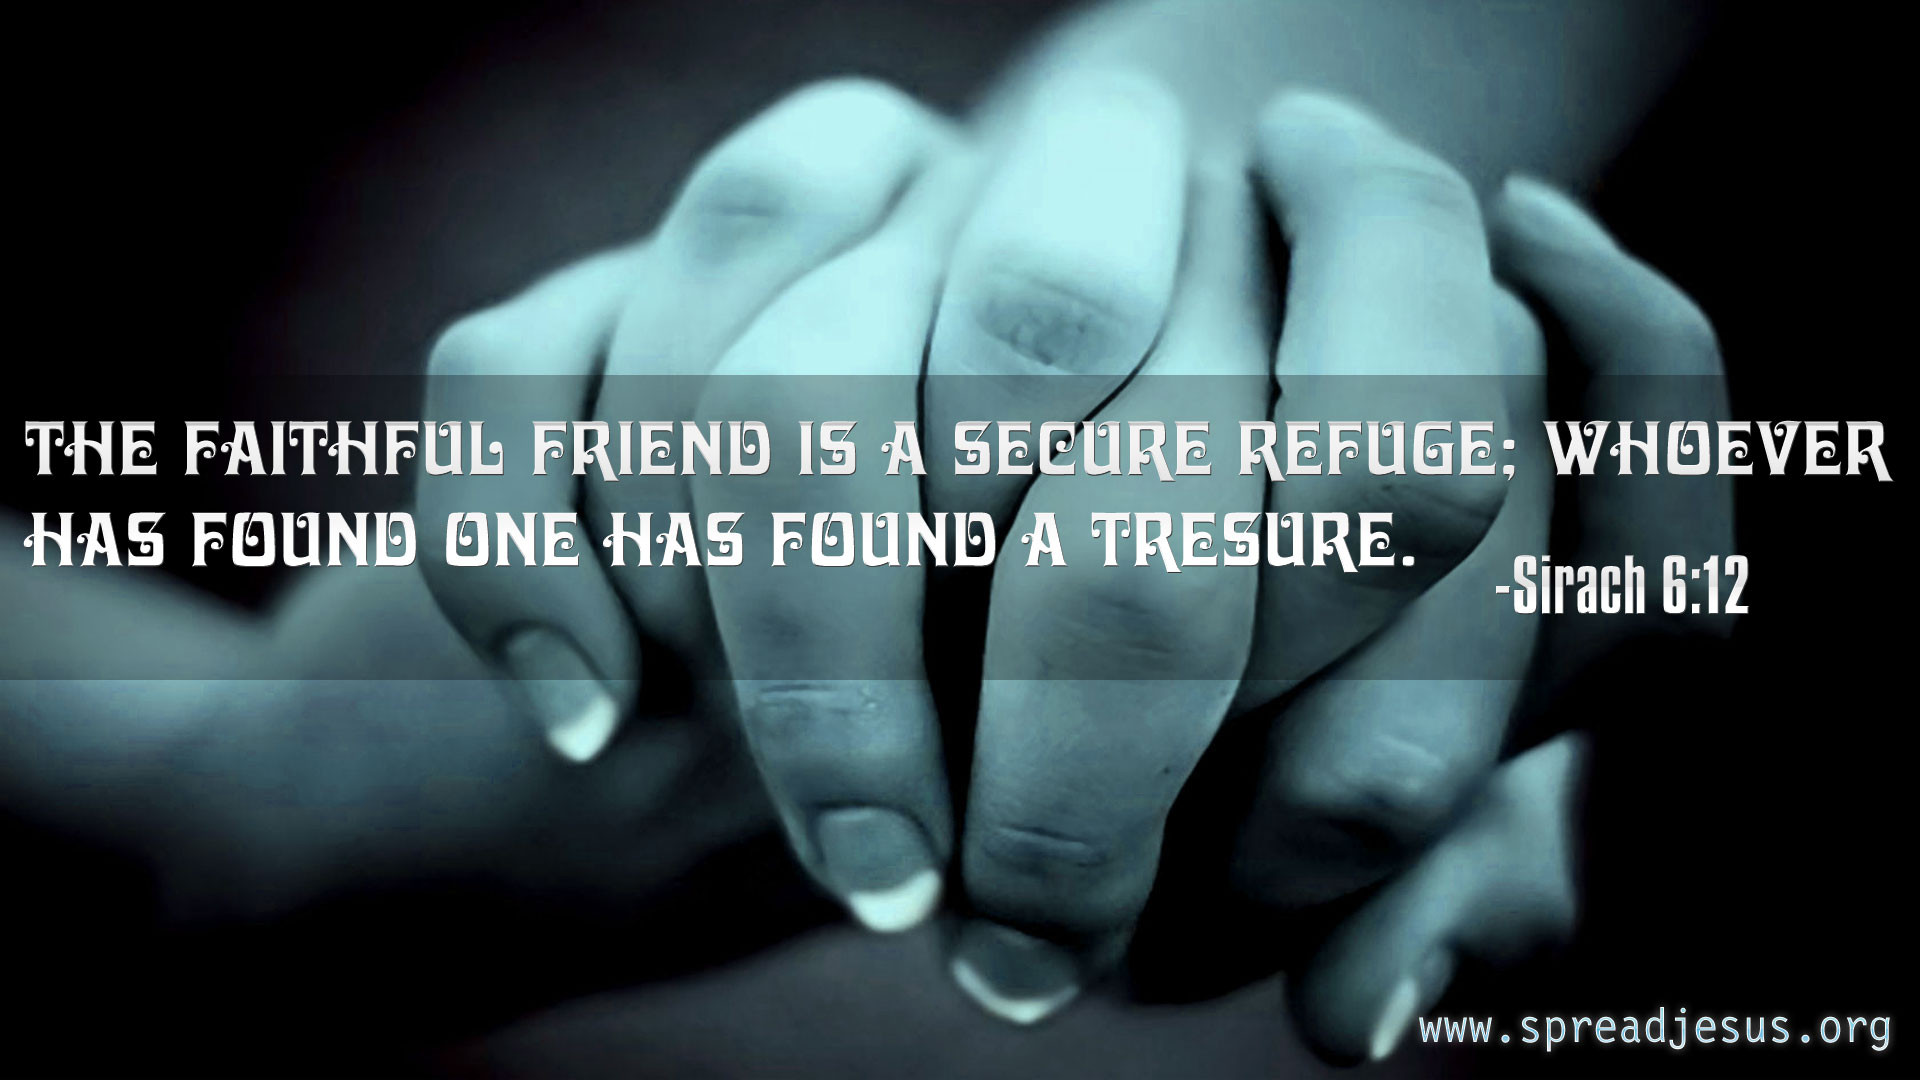 Friendship Quotes From The Bible
 Bible Quotes About Friends QuotesGram